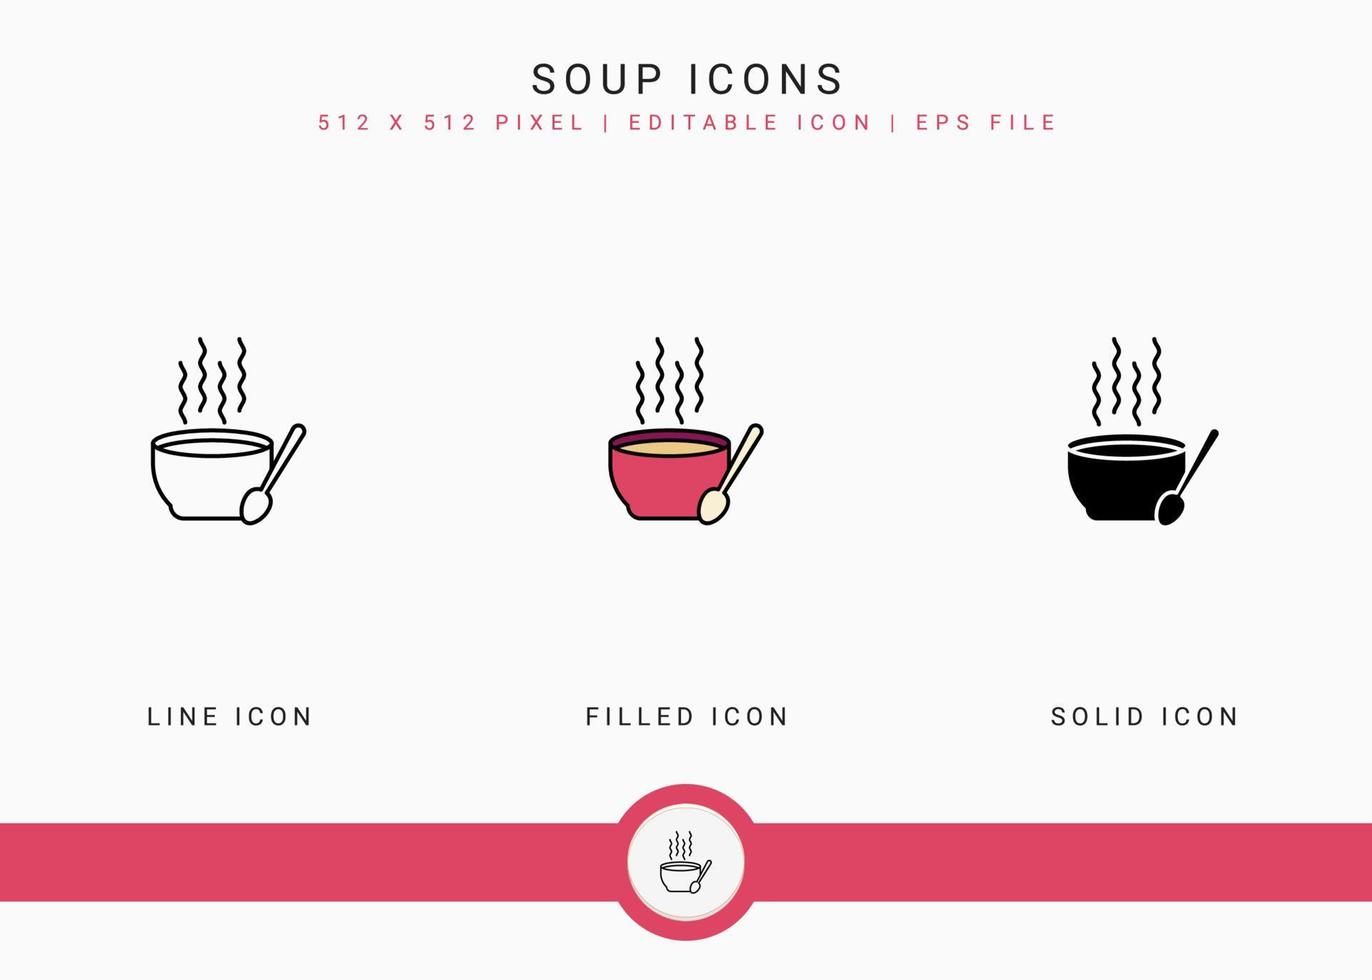 Soup icons set vector illustration with solid icon line style. Hot bowl concept. Editable stroke icon on isolated background for web design, user interface, and mobile application